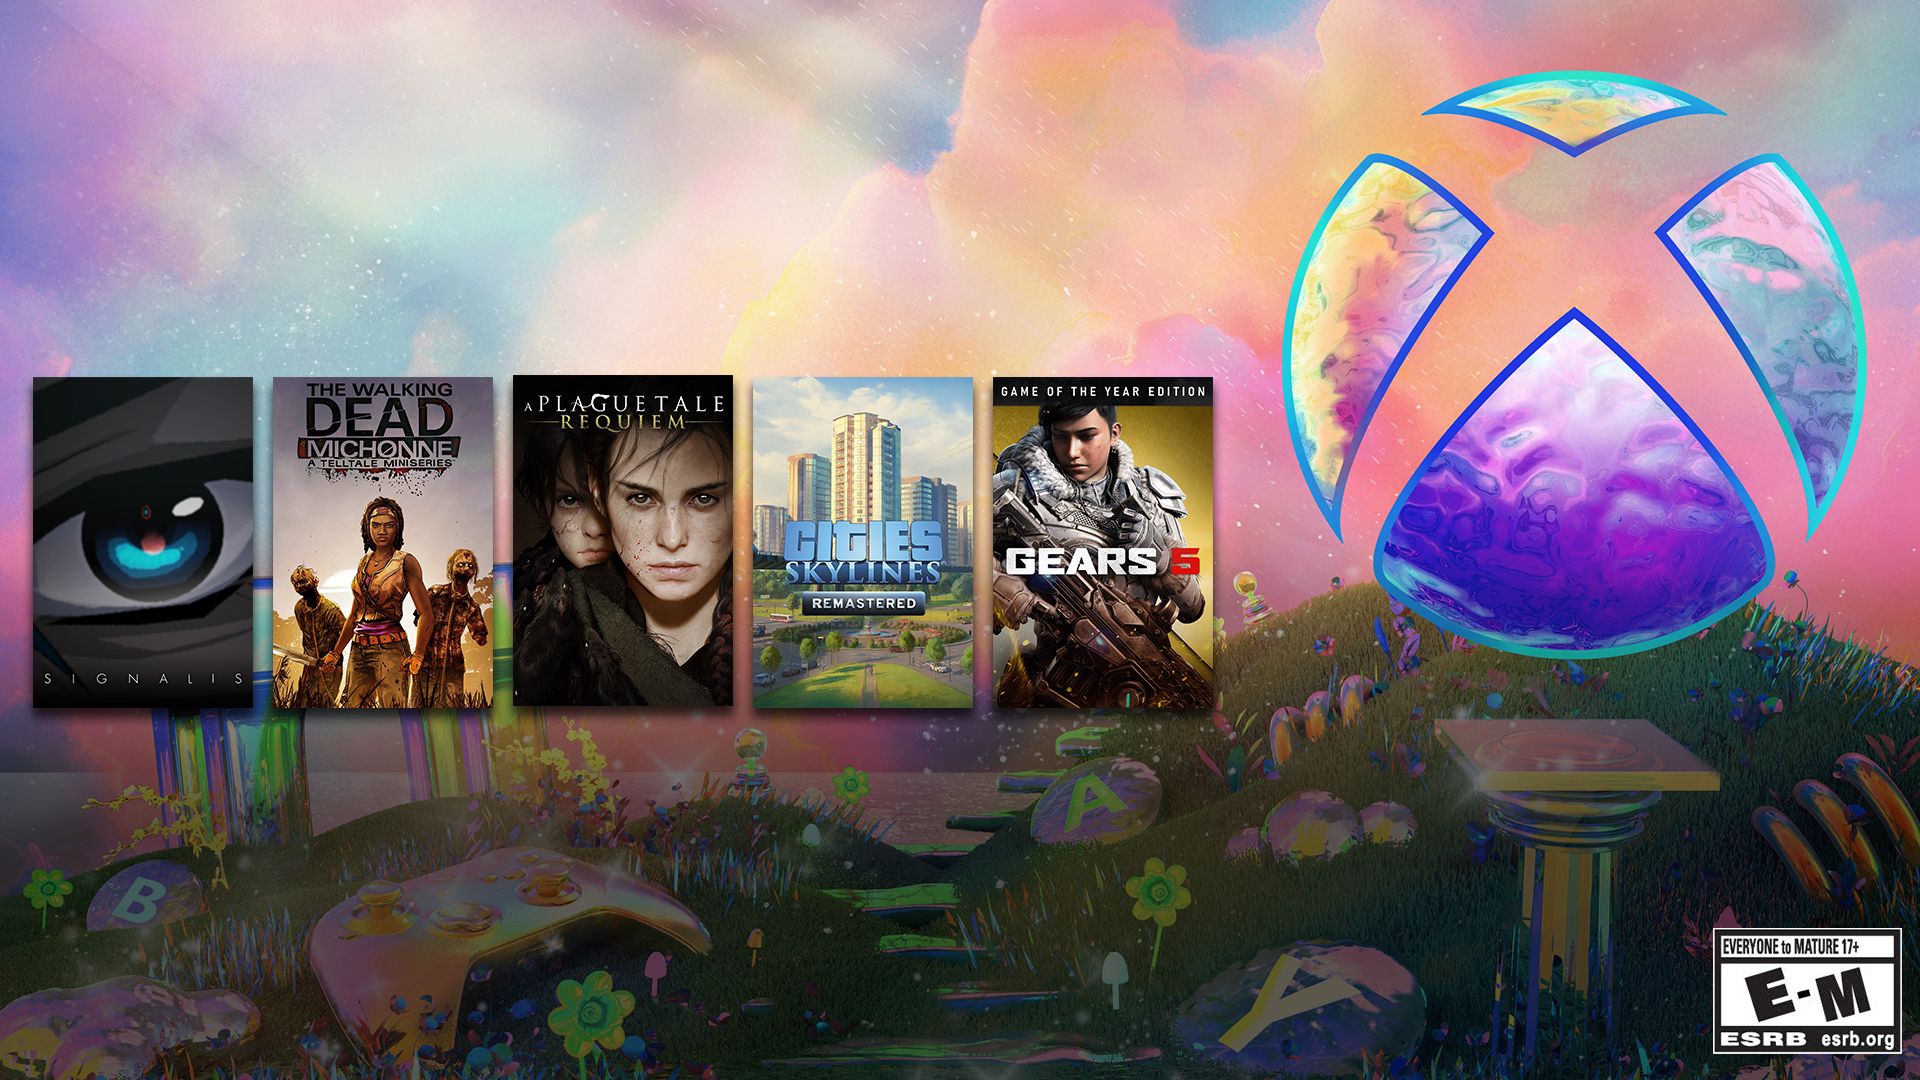 A compilation image featuring game box art for Signalis, The Walking Dead: Michonne, A Plague Tale: Requiem, Cities: Skylines Remastered, and Gears 5 on a magical, pastel landscape with rolling hills, the sea, and the sun reflecting off purple and pink clouds with an Xbox sphere reflecting the color of the sky.